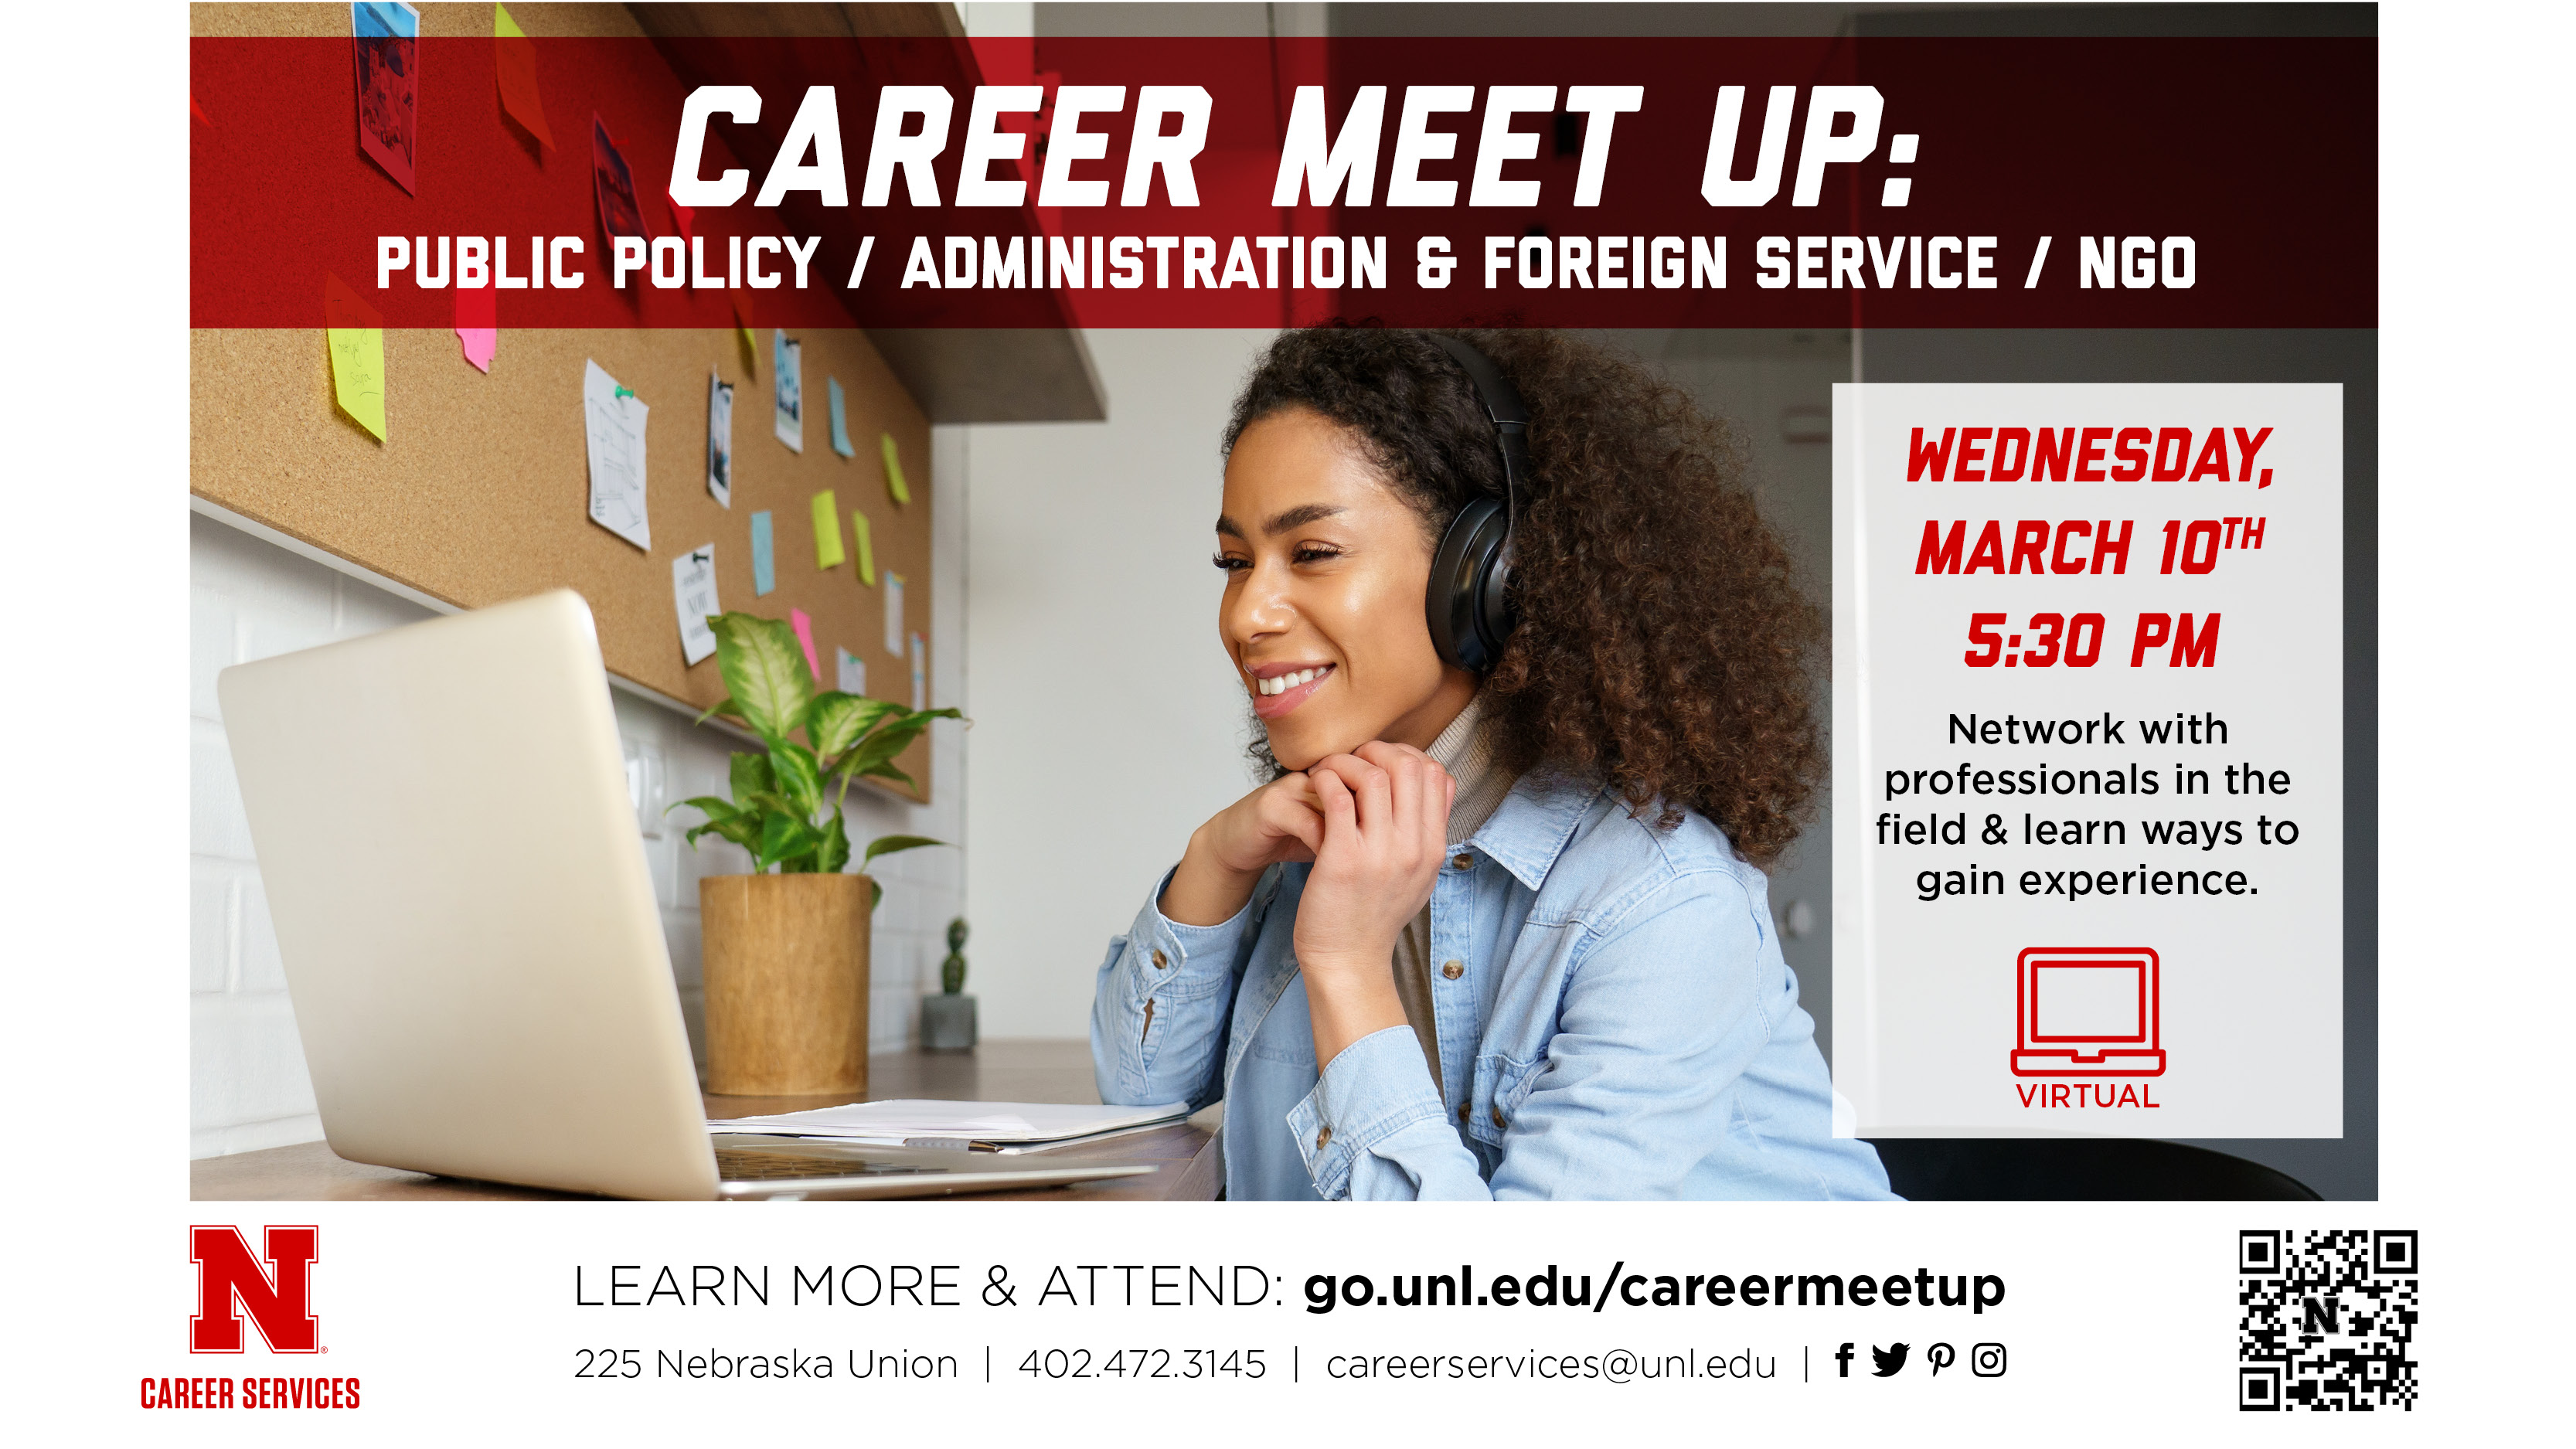 Career Meet Up is March 10th at 5:30PM